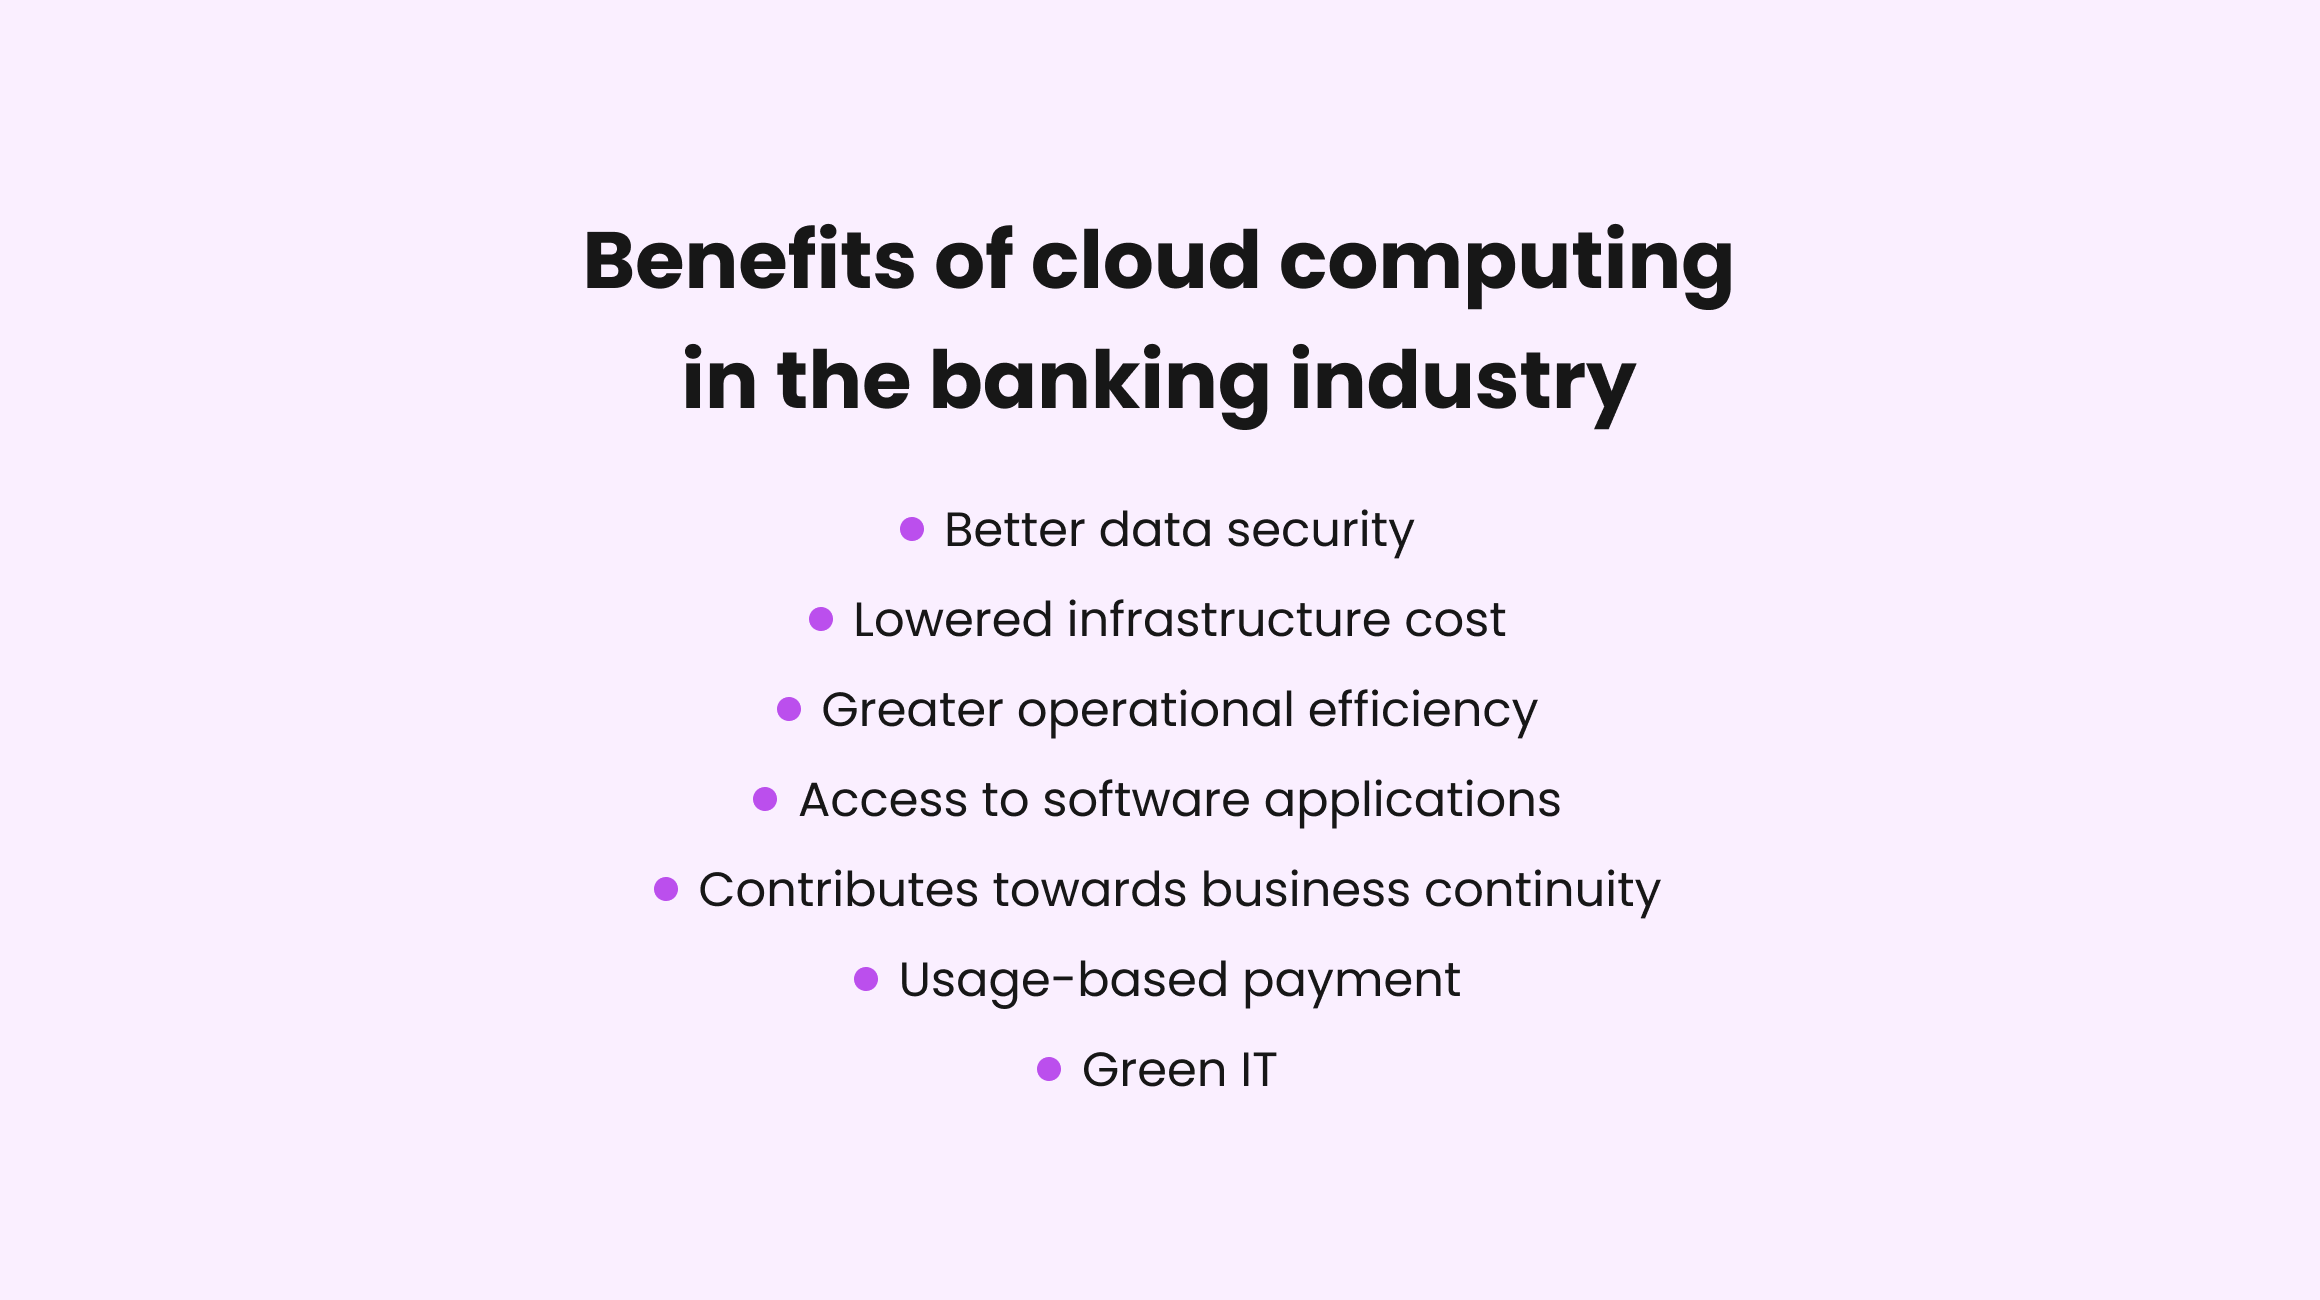 Benefits of cloud computing in the banking industry